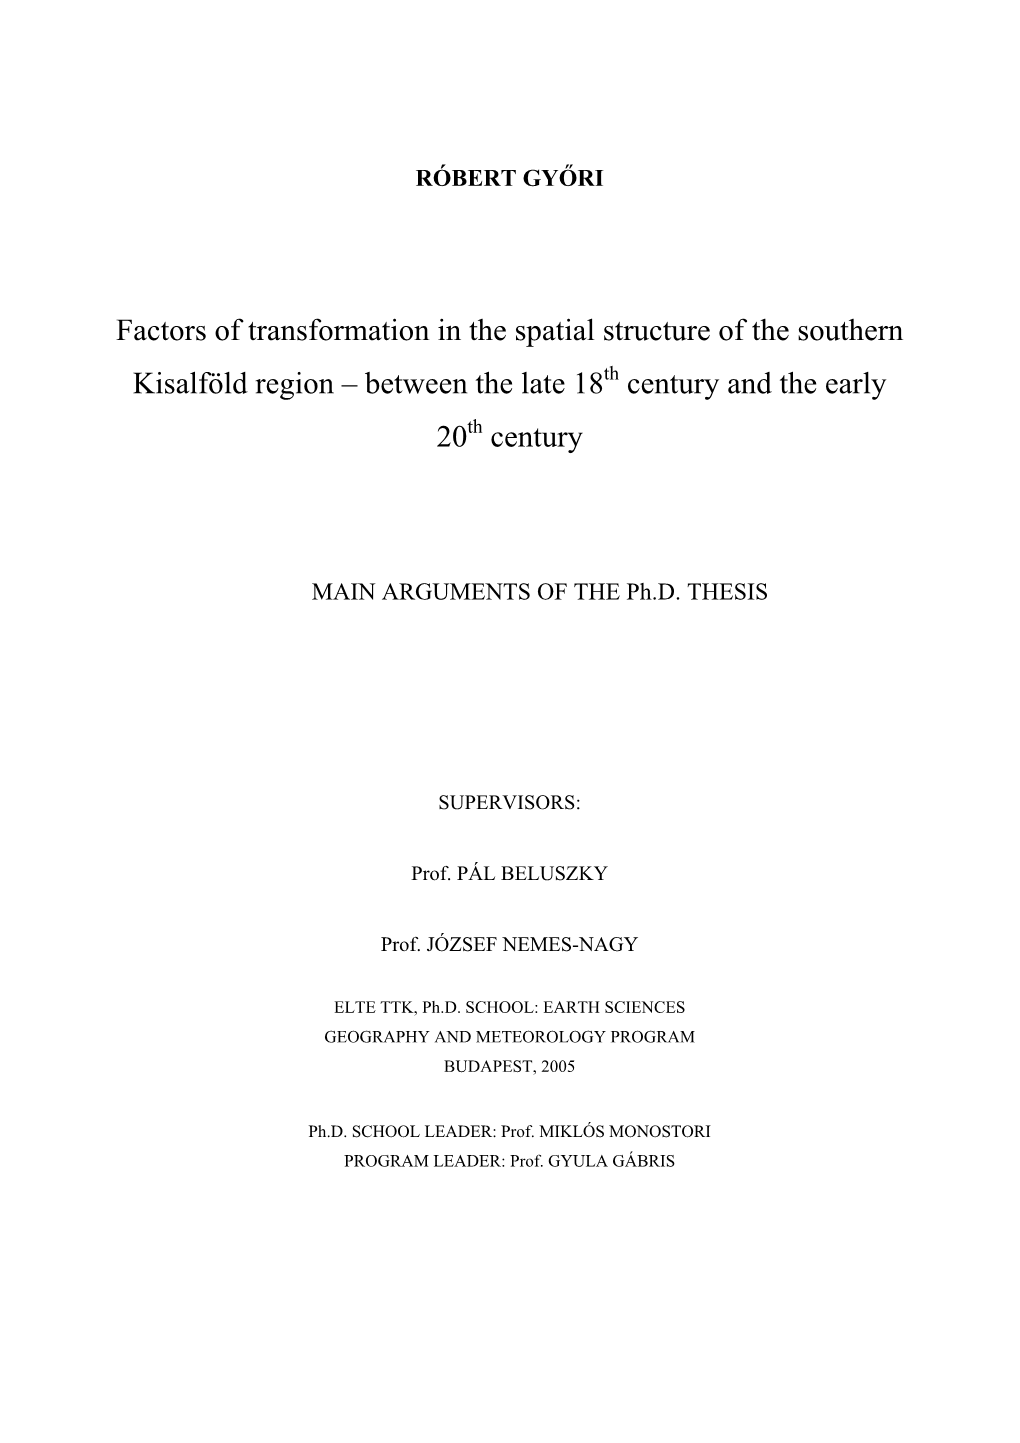 Factors of Transformation in the Spatial Structure of the Southern Kisalföld Region – Between the Late 18Th Century and the Early 20Th Century